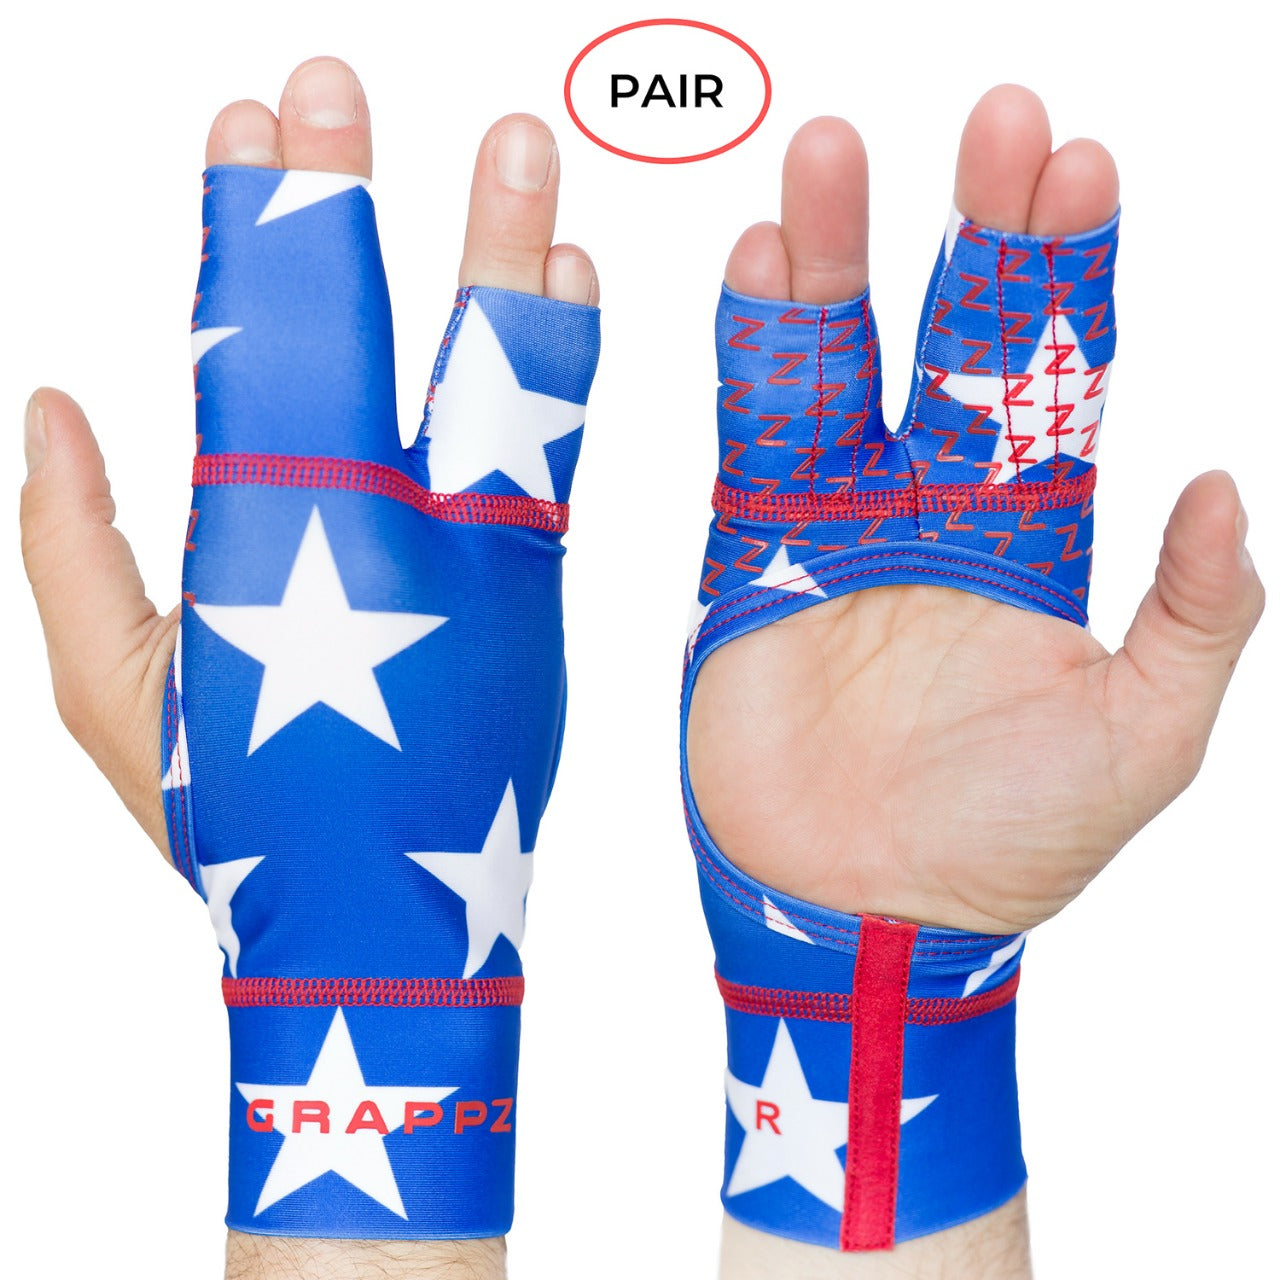 Finger Tape Alternative Splint Athletic Gloves For BJJ / All Sports - Red, White and Blue Grappz